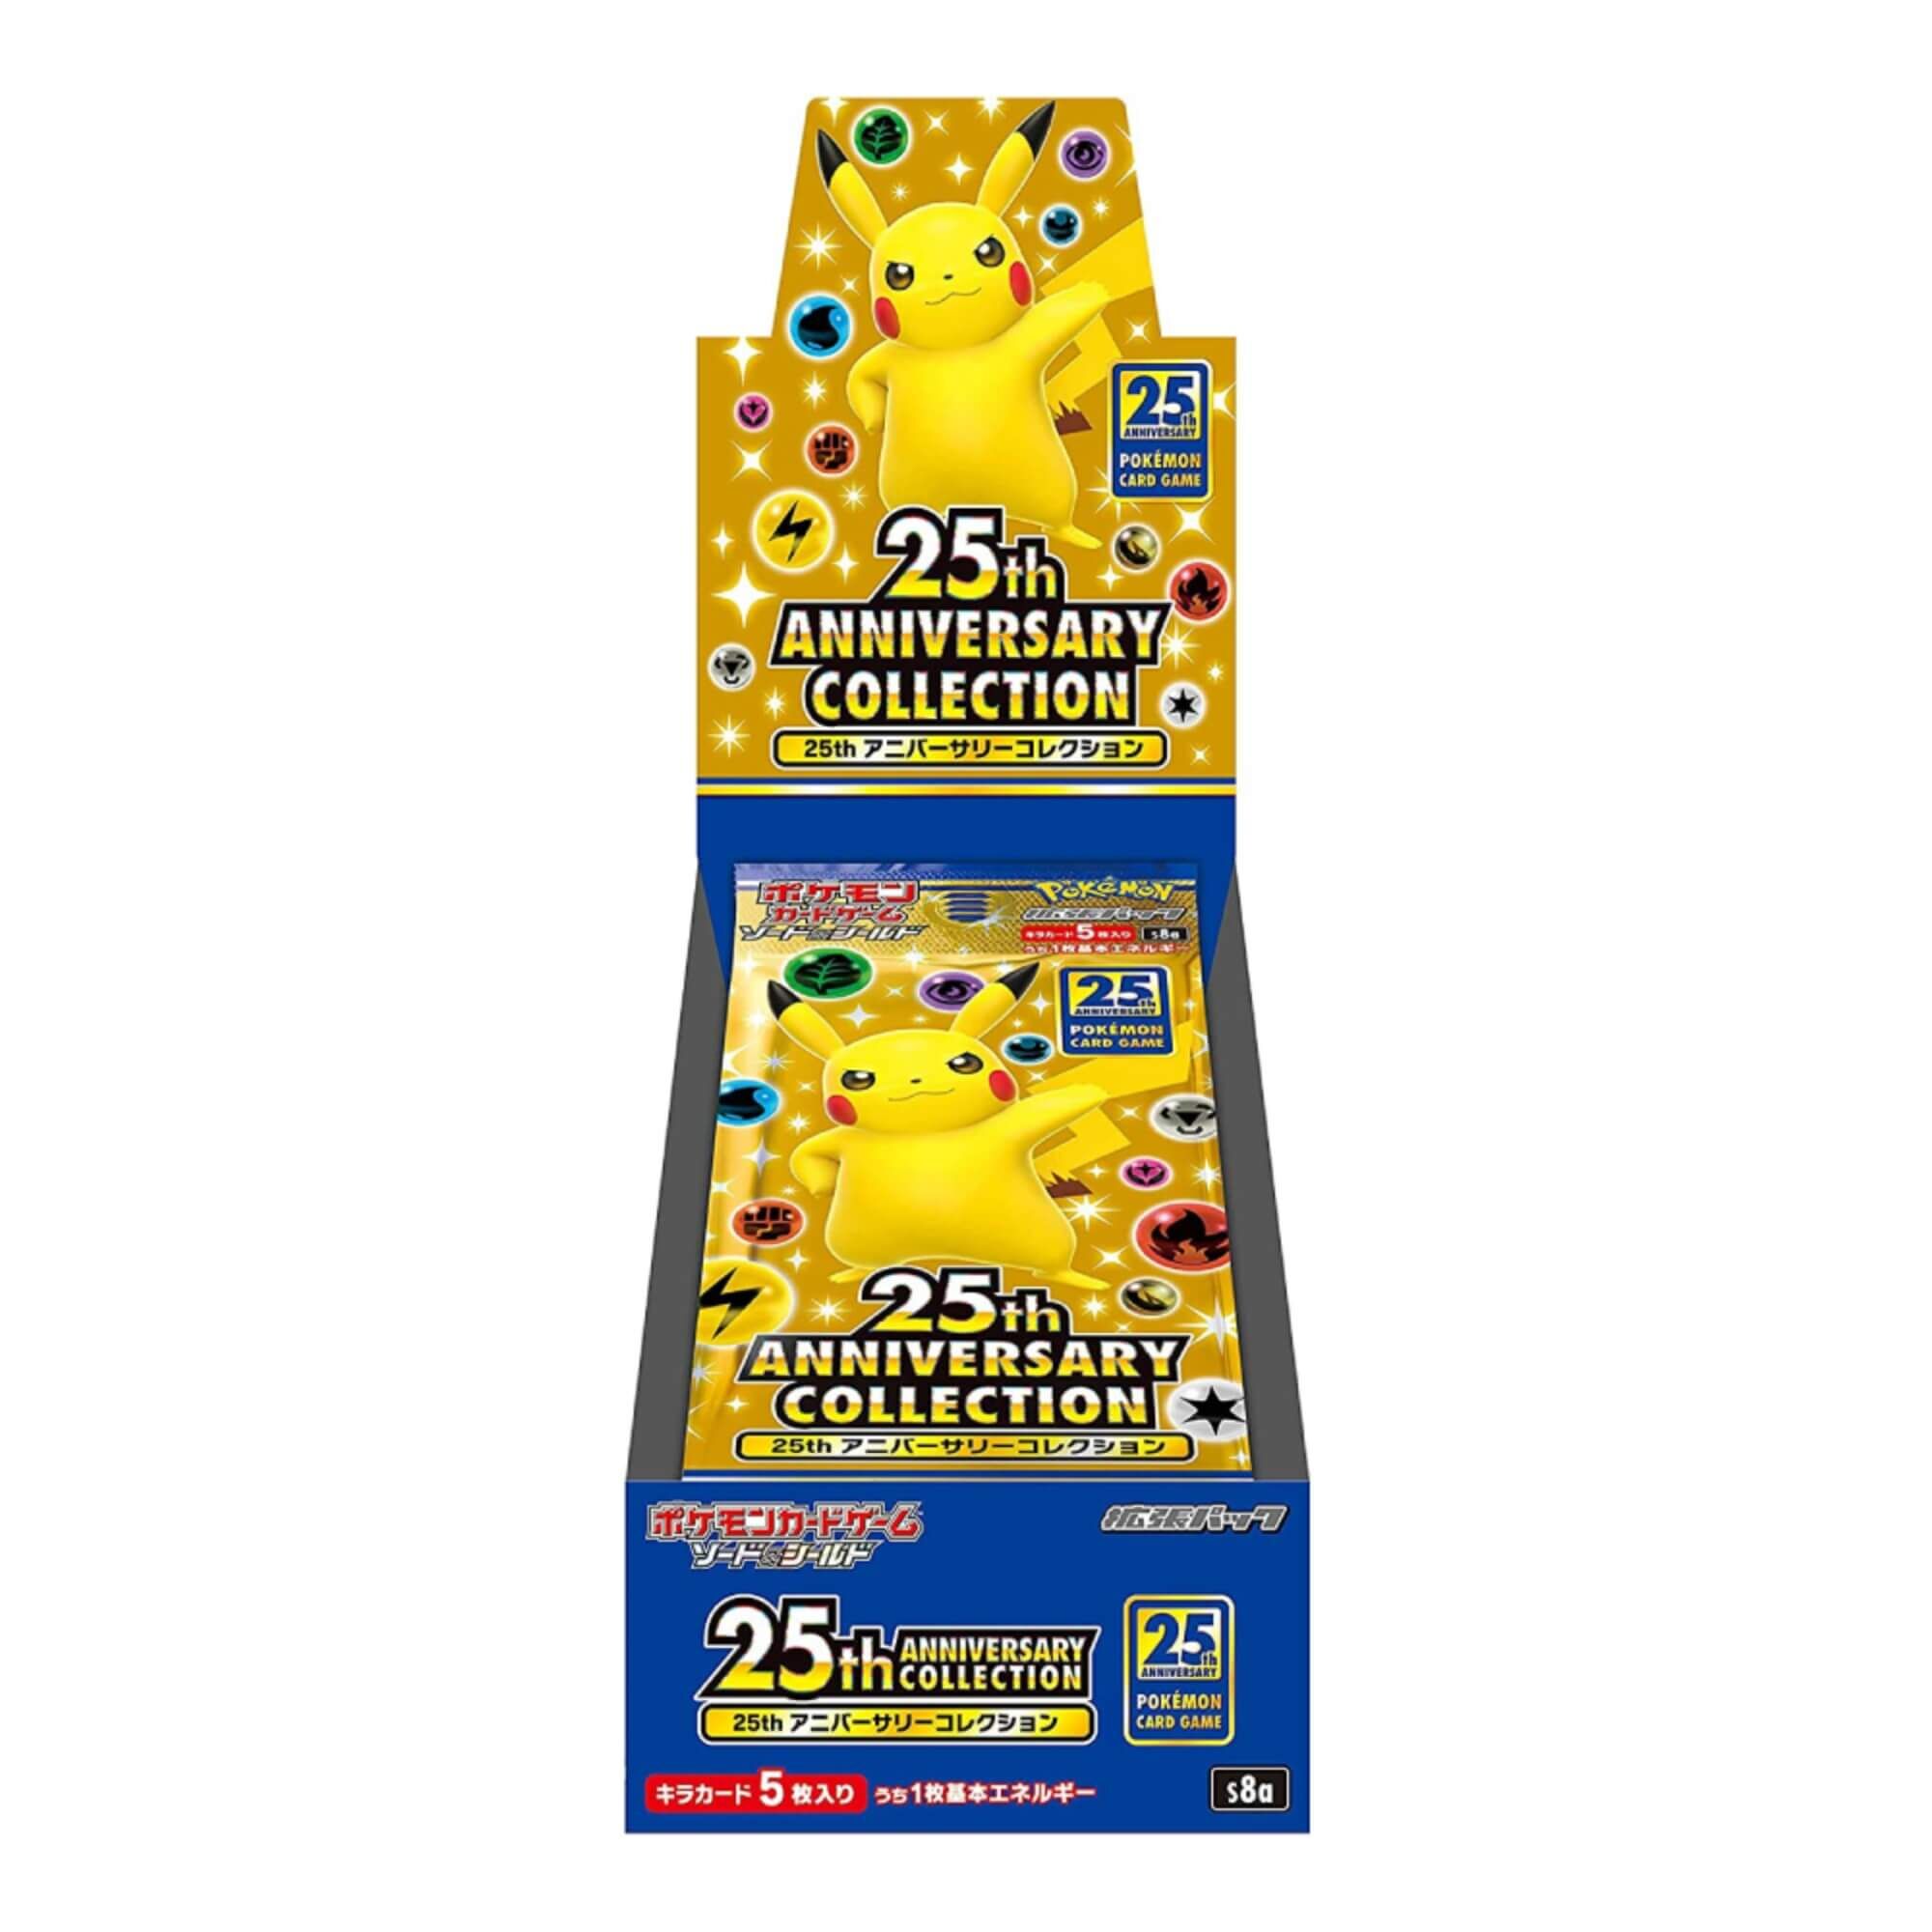 Pokémon 25th Anniversary Collection (s8a) - Display (JAP)